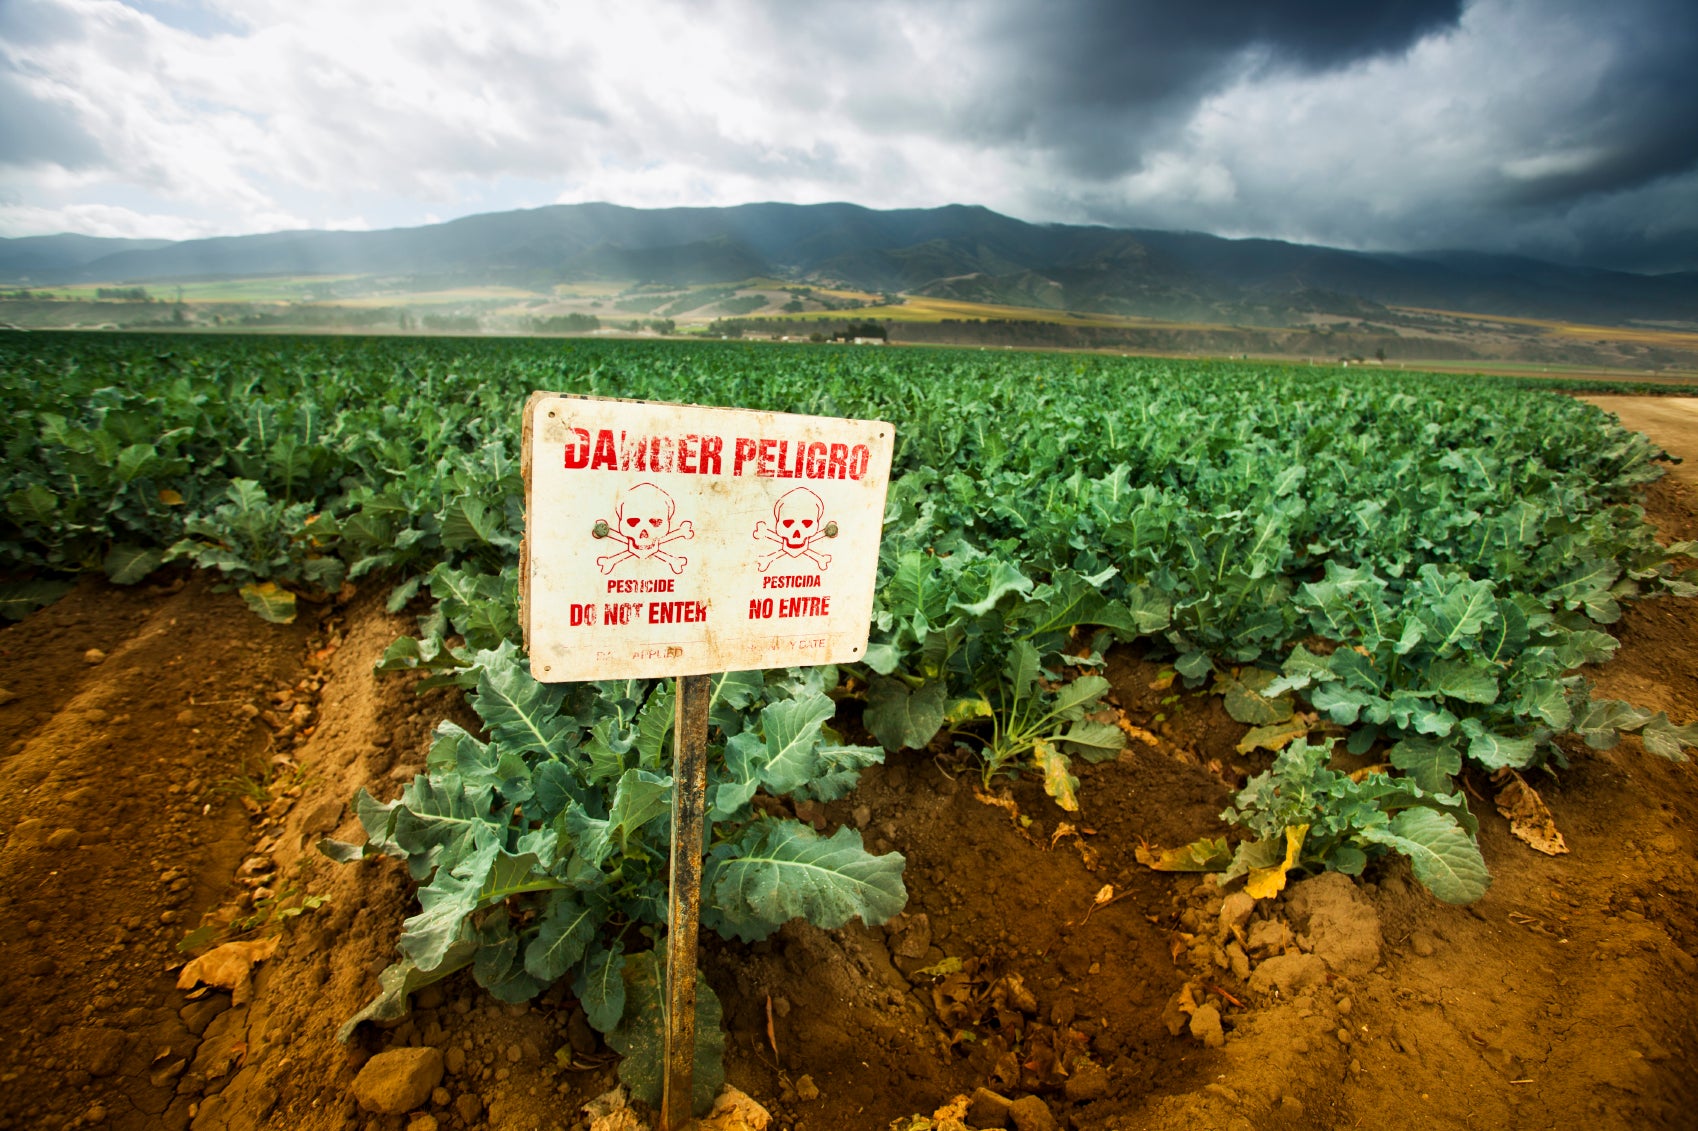 Poison pest control chemicals sprayed on a  field in the Salinas Valley, California.
(Pgiam / iStockphoto)